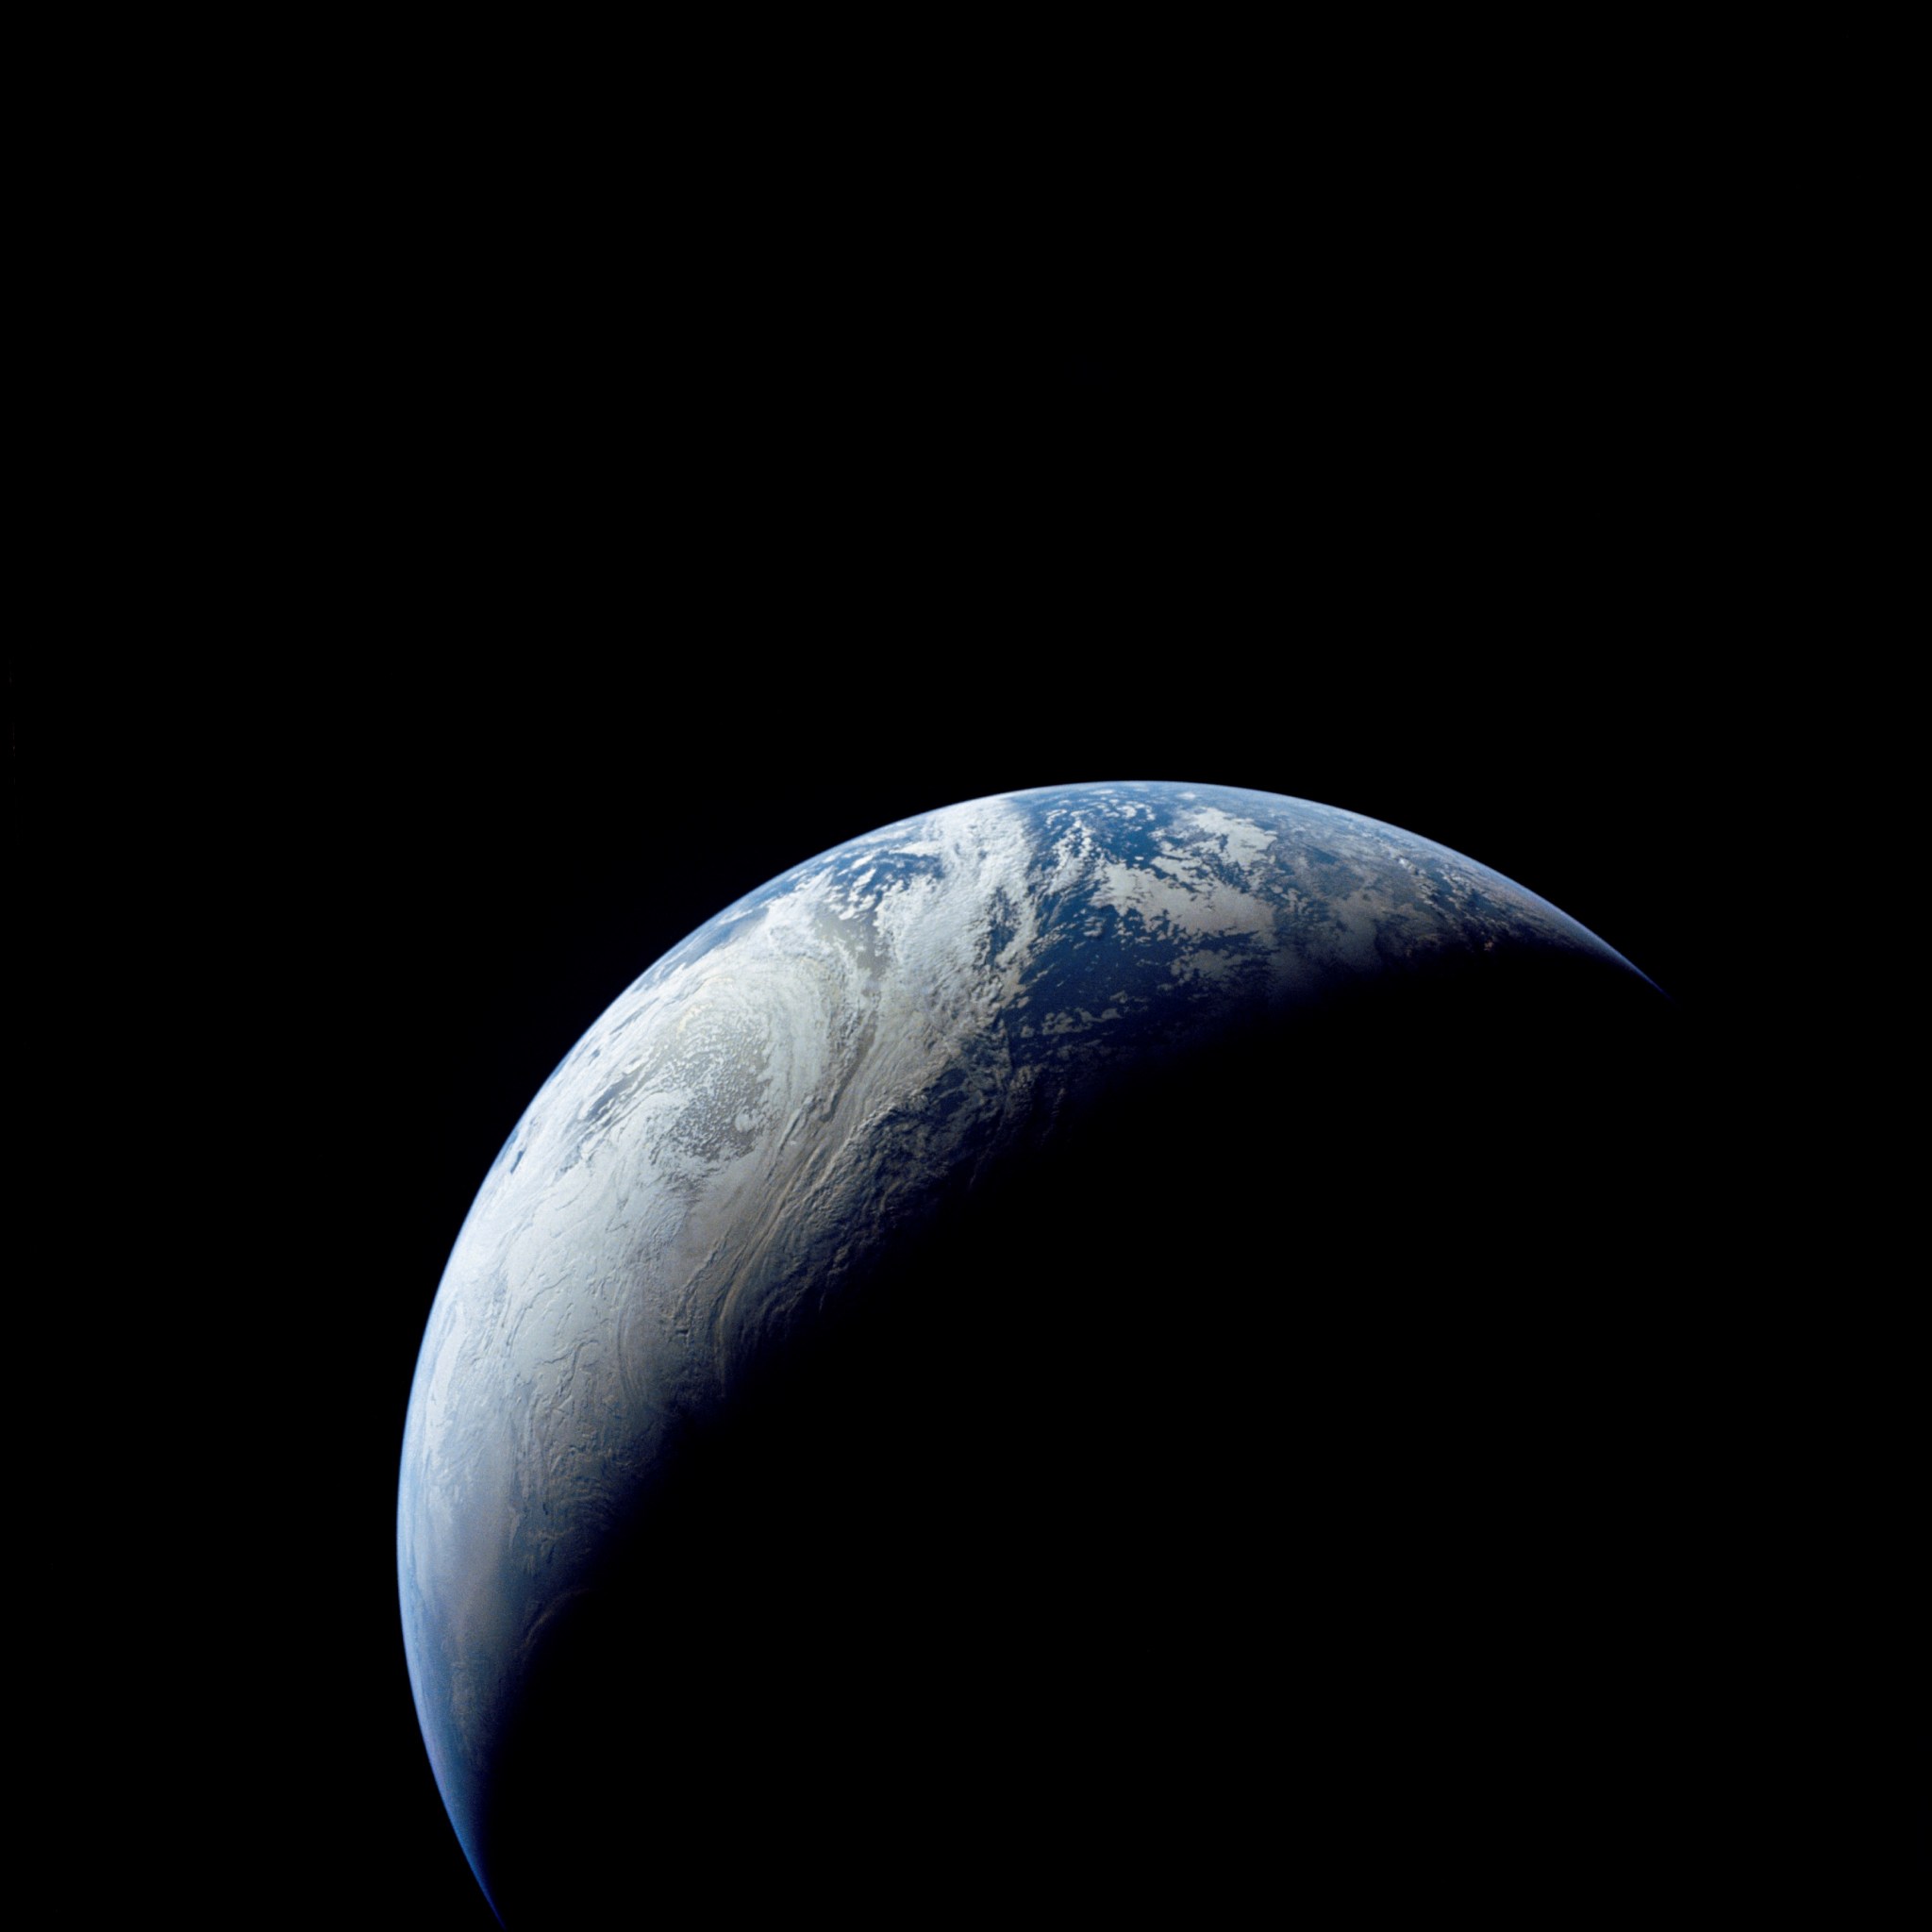 The Earth photographed by Apollo 4 from a distance of 11,214 miles.